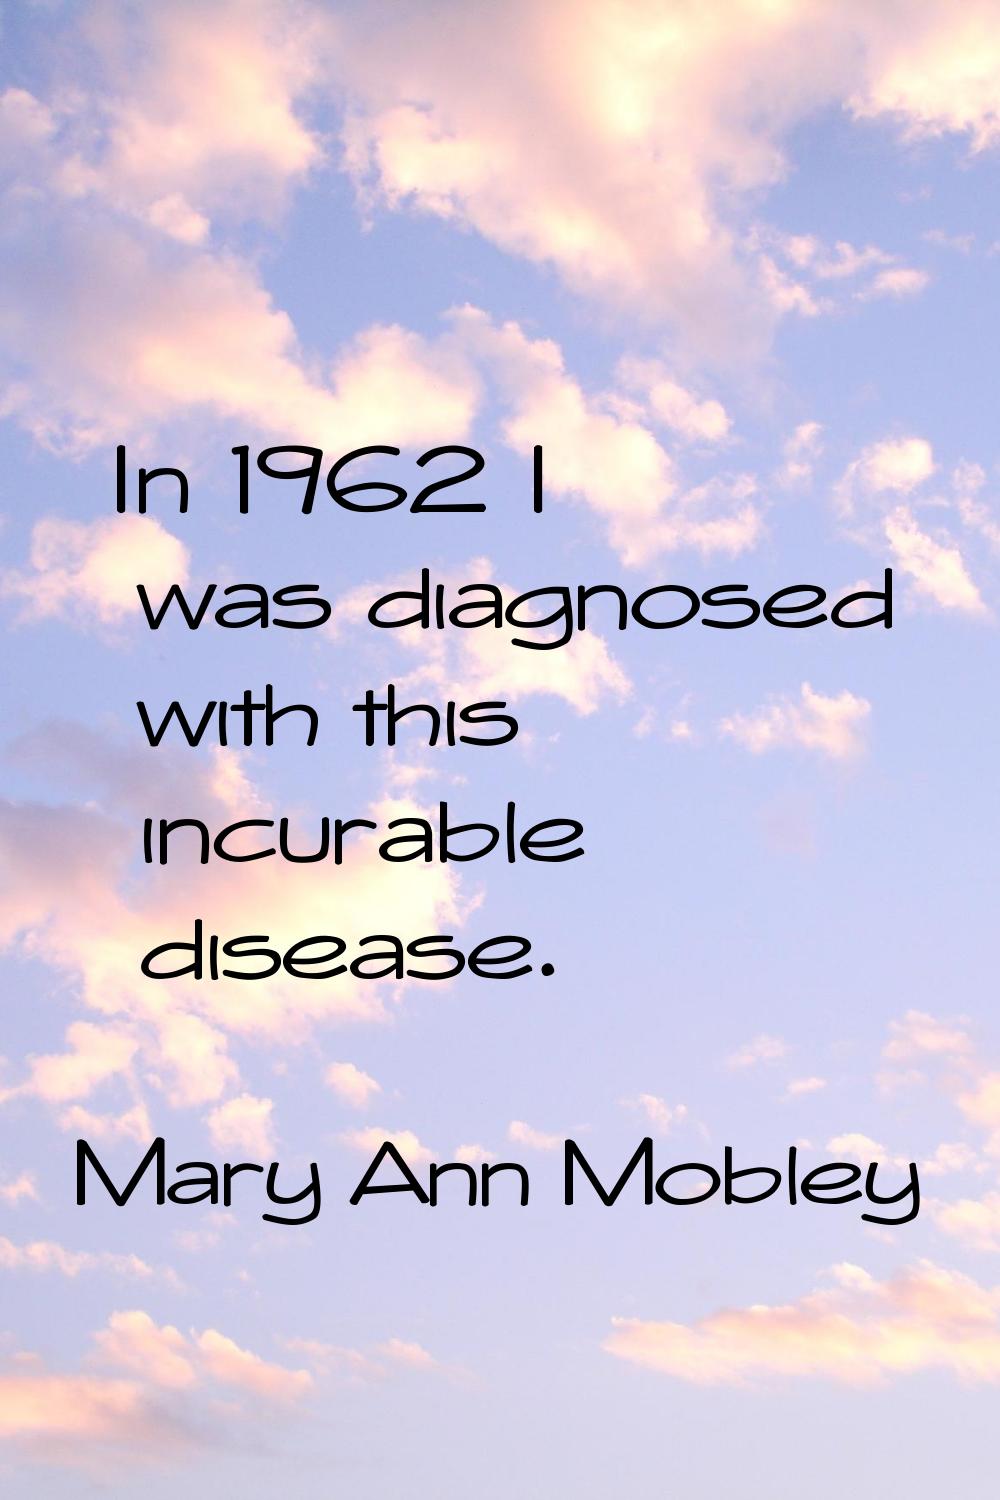 In 1962 I was diagnosed with this incurable disease.